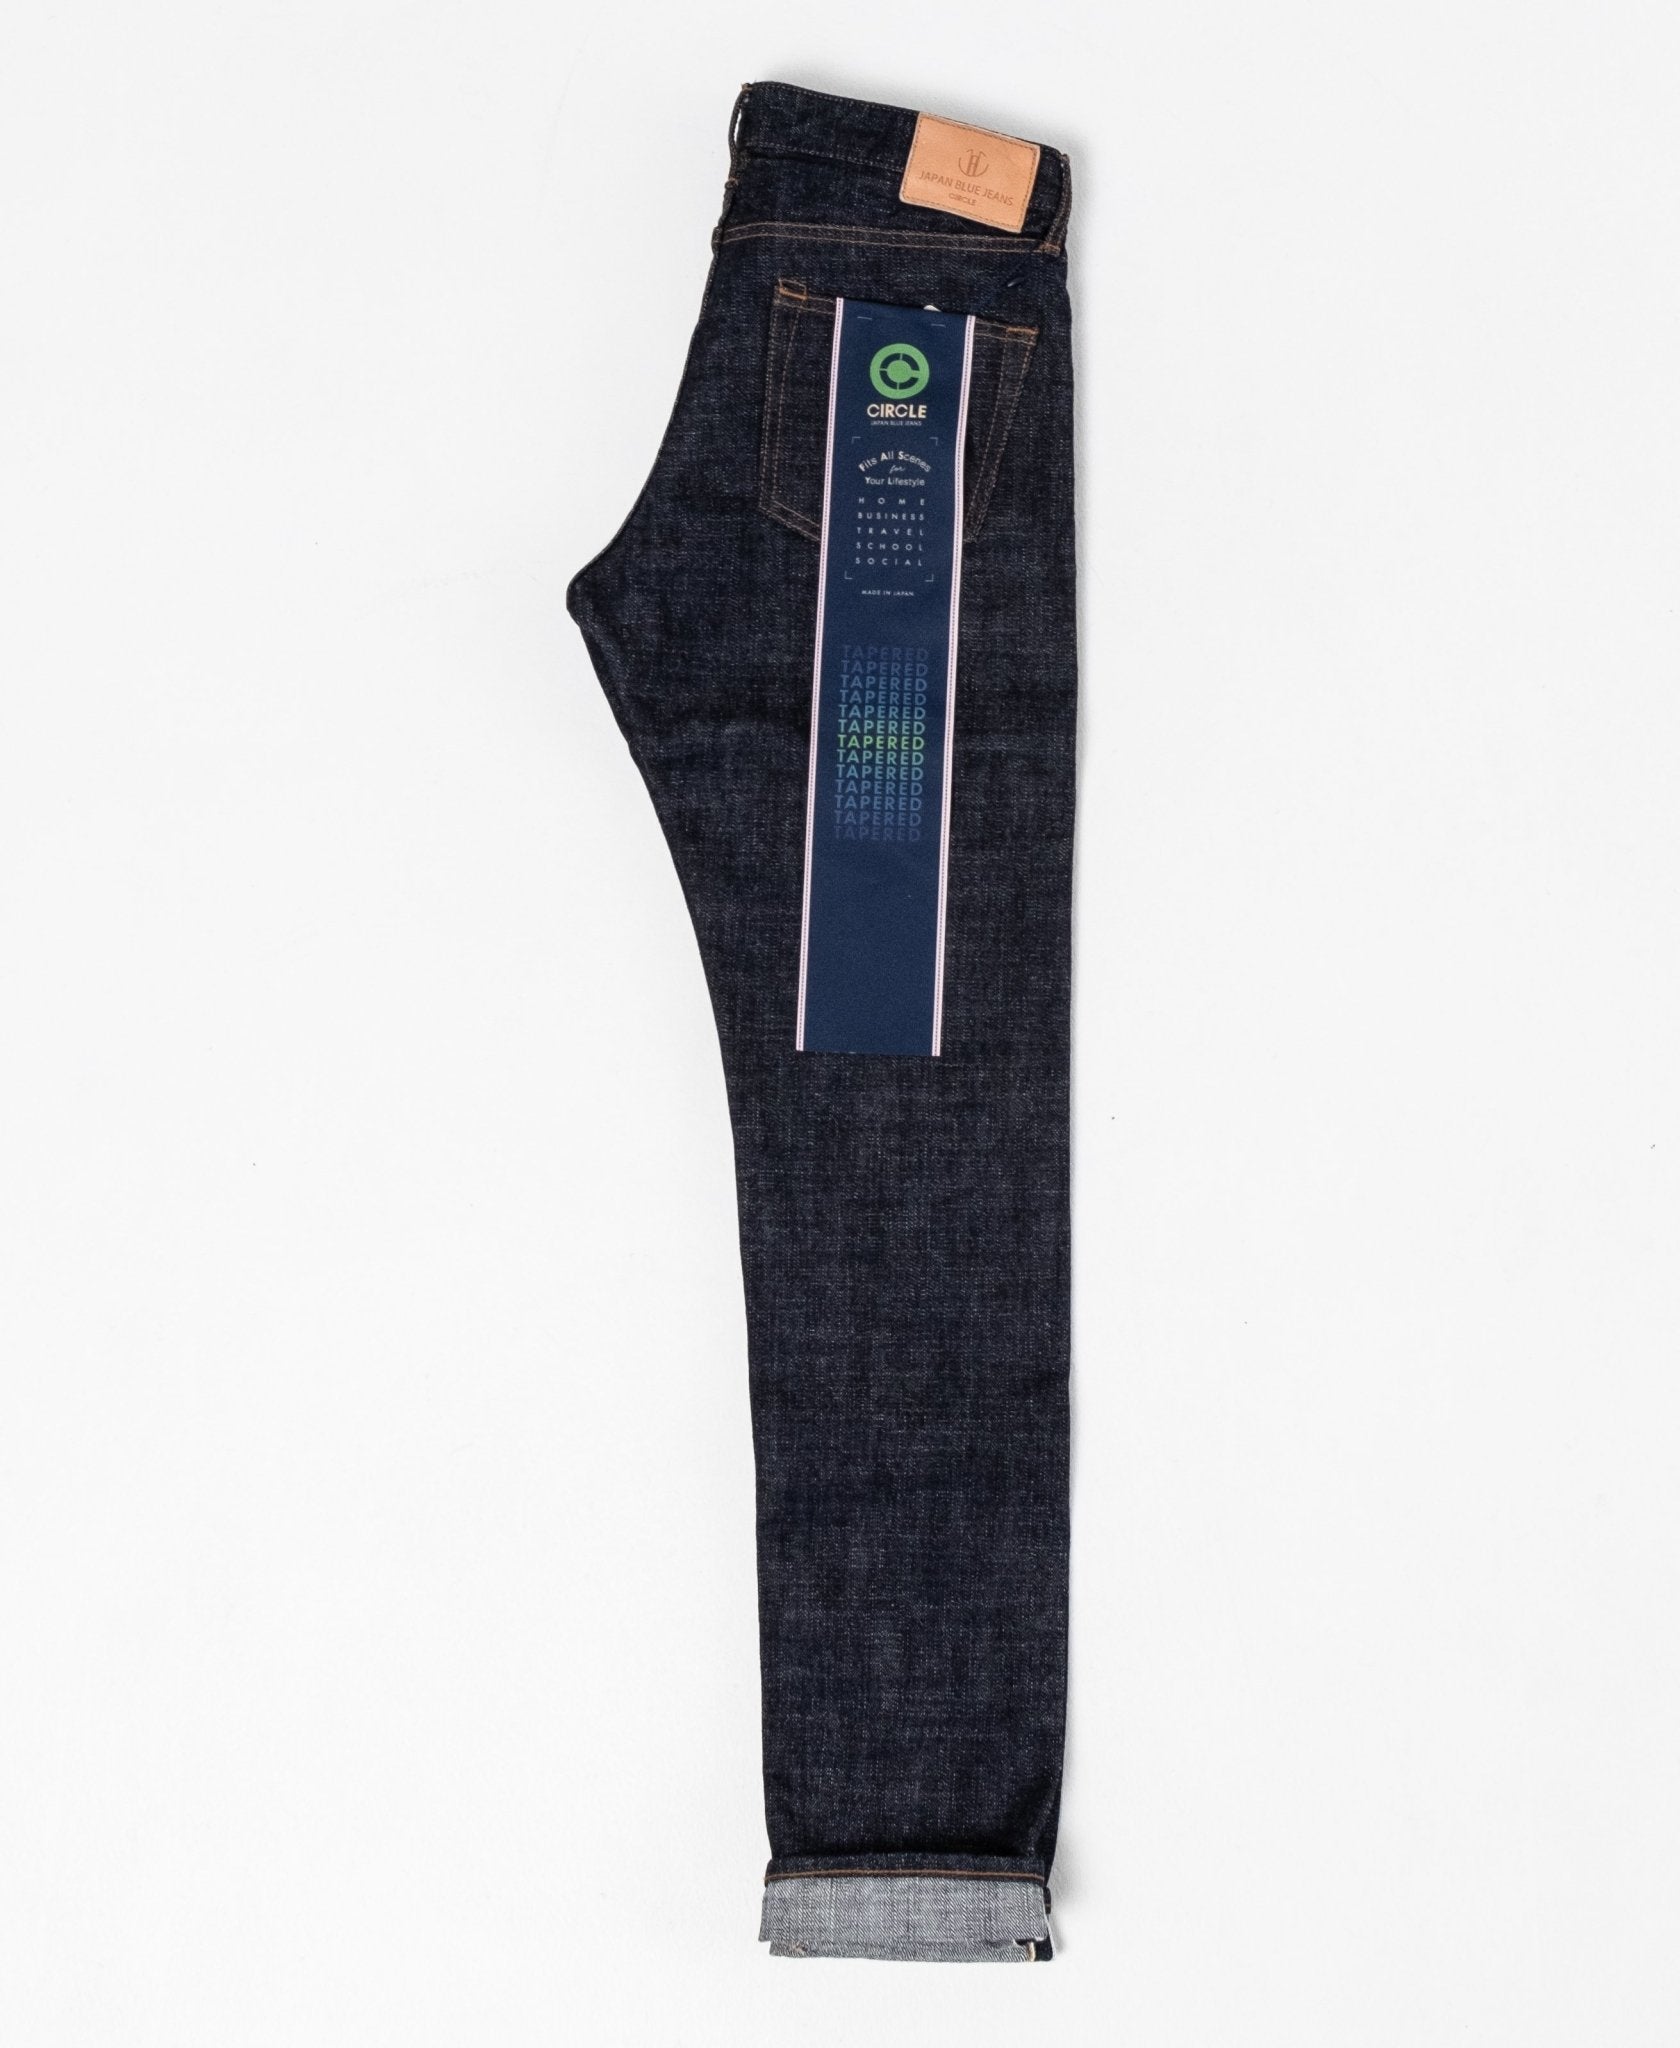 J266 Circle 16.5 oz Tapered Jeans - Meadow